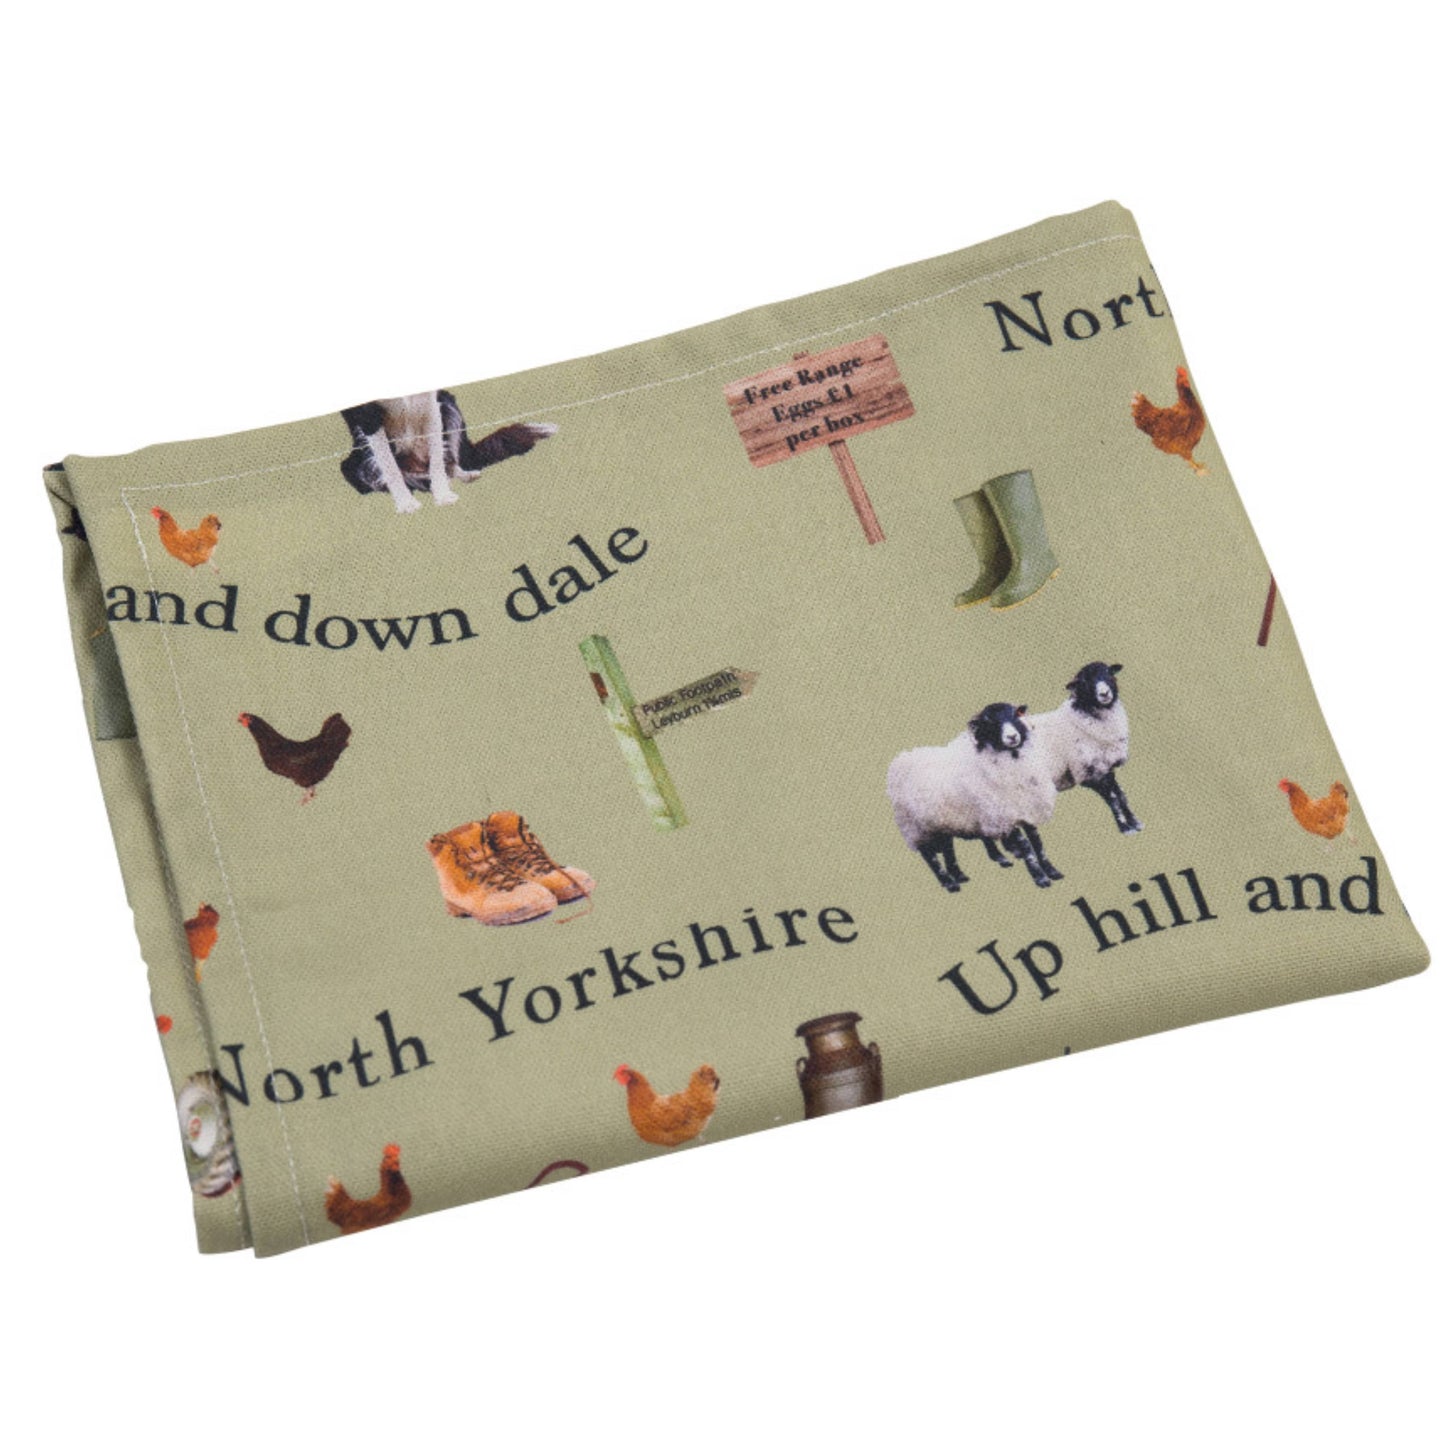 Yorkshire Dales Tea Towel - The Great Yorkshire Shop